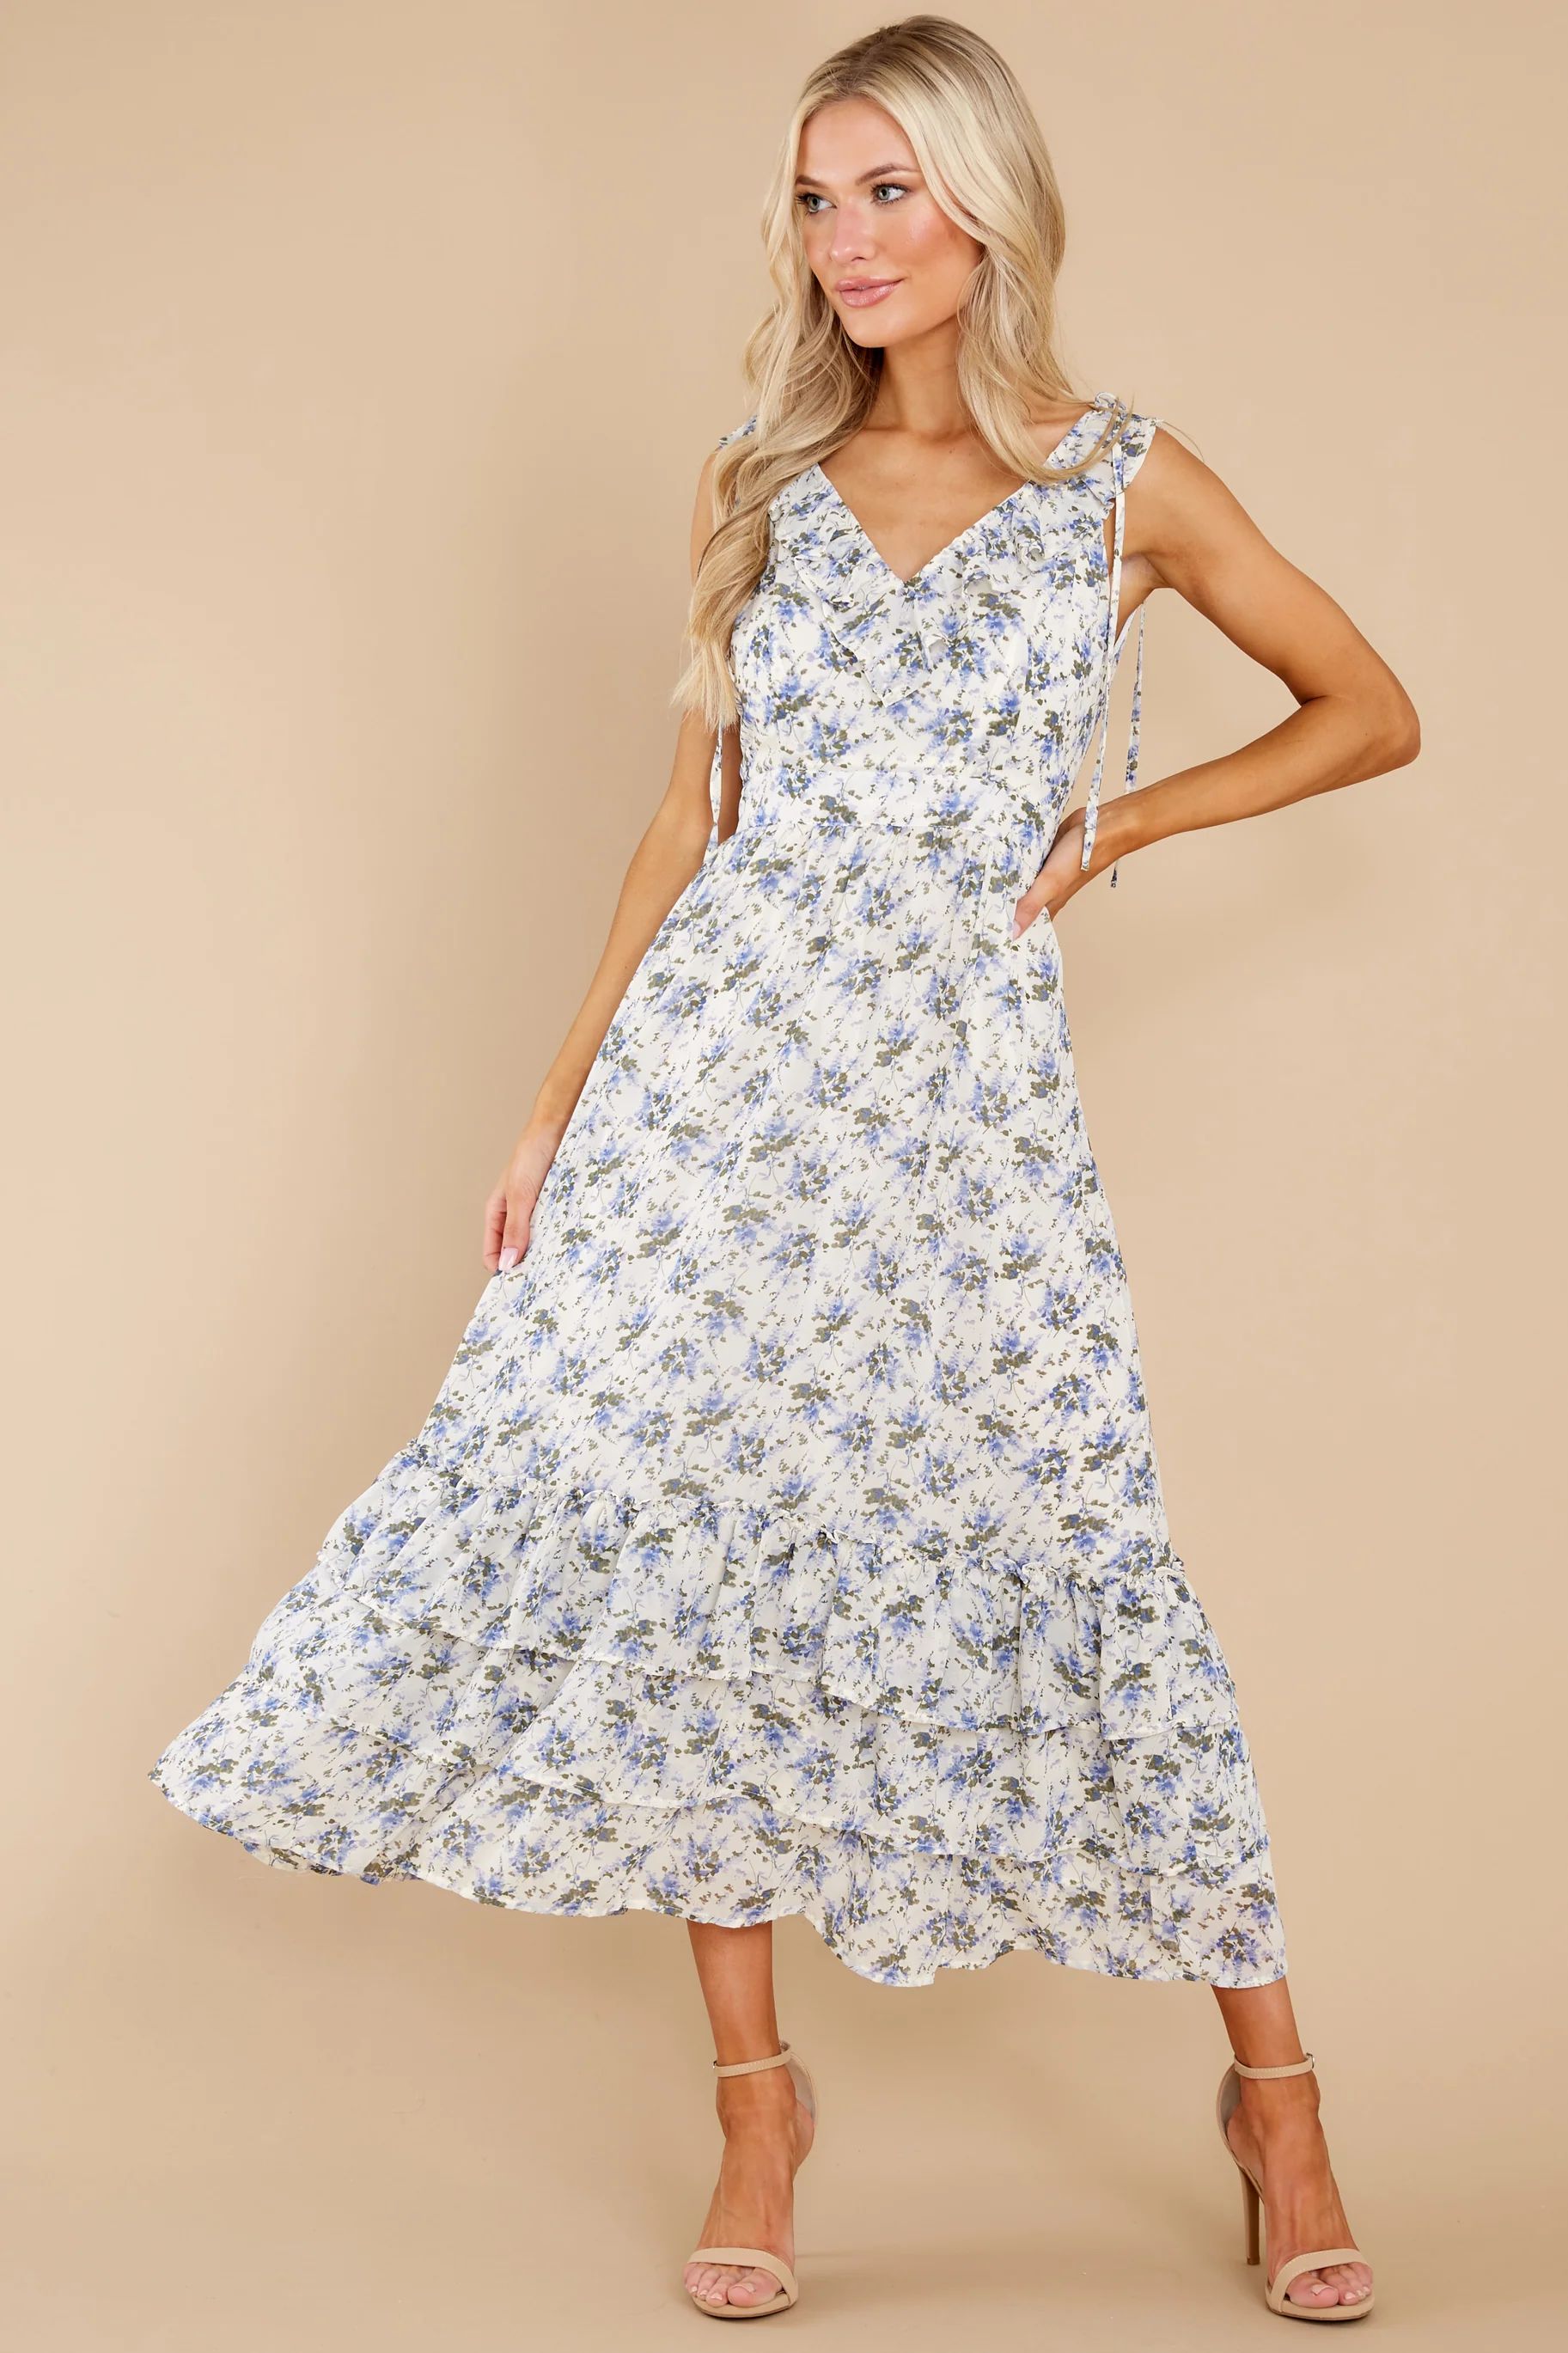 You Mean Everything Blue And White Floral Print Maxi Dress | Red Dress 